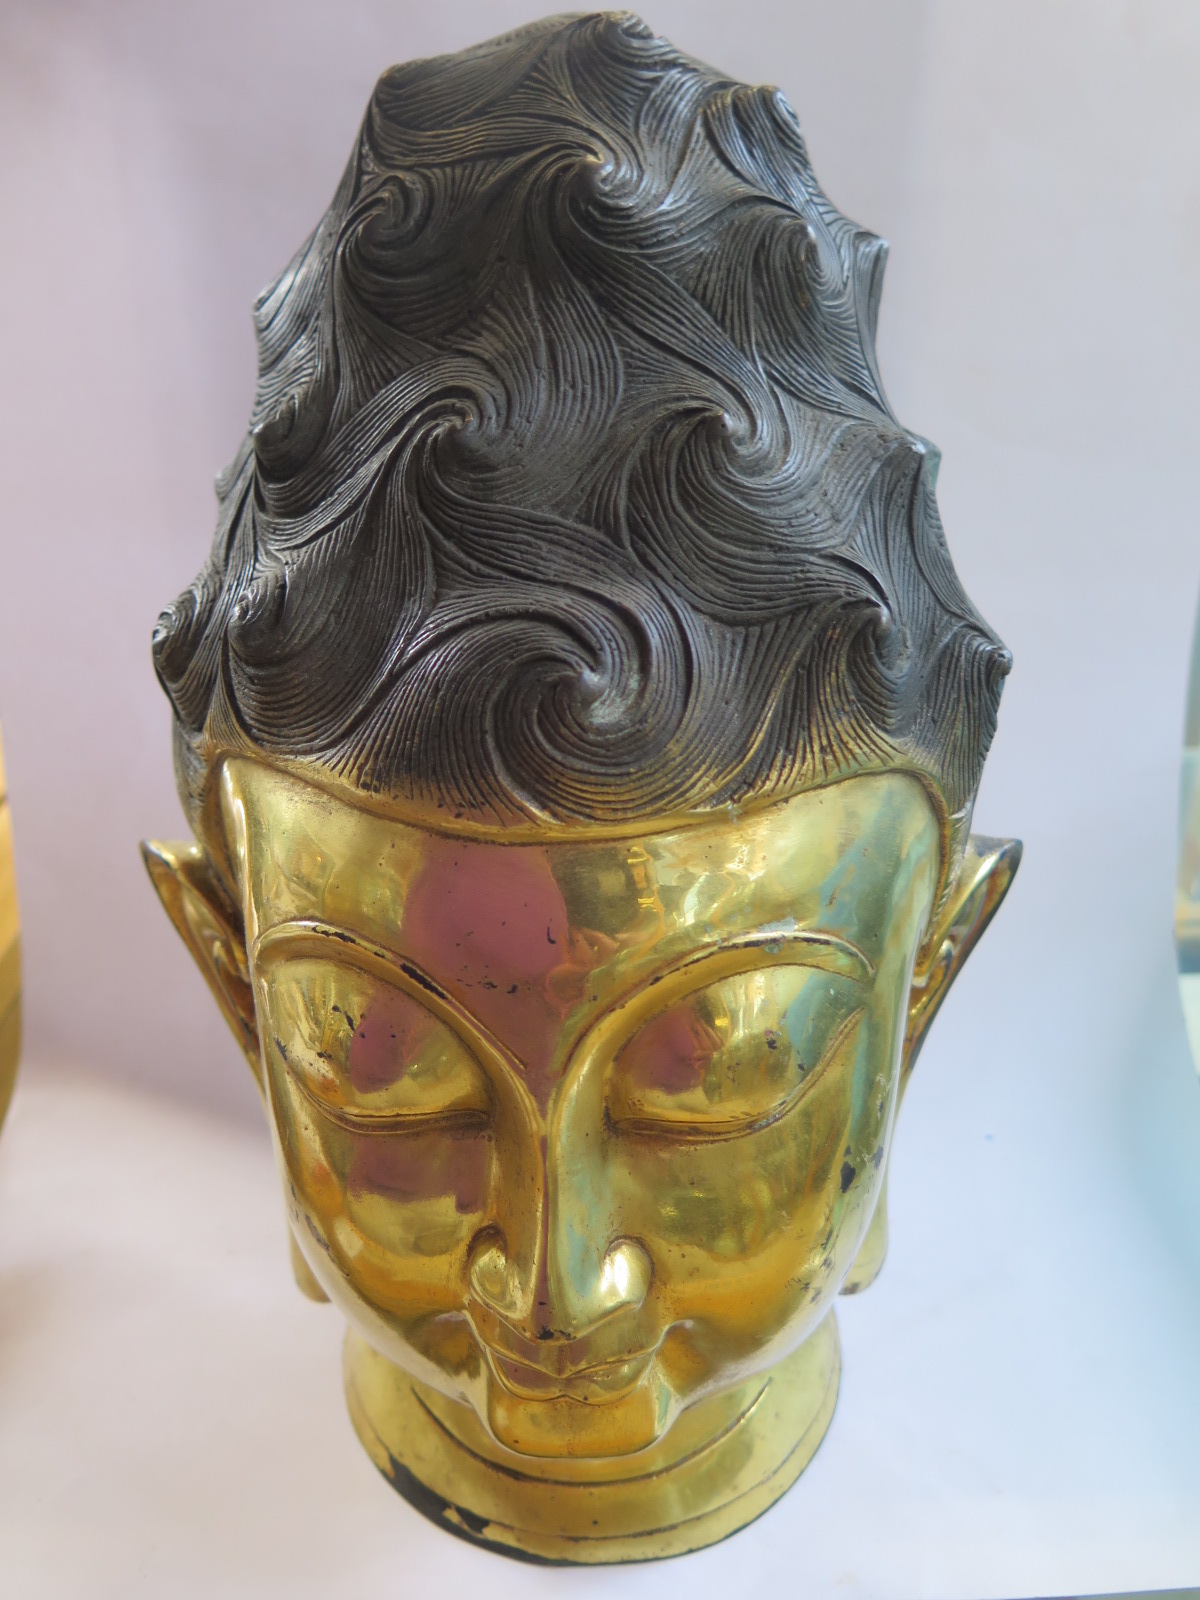 A gilt bronze Chinese Buddha head, 34cm tall, no obvious damage, with aged finish - Image 2 of 6